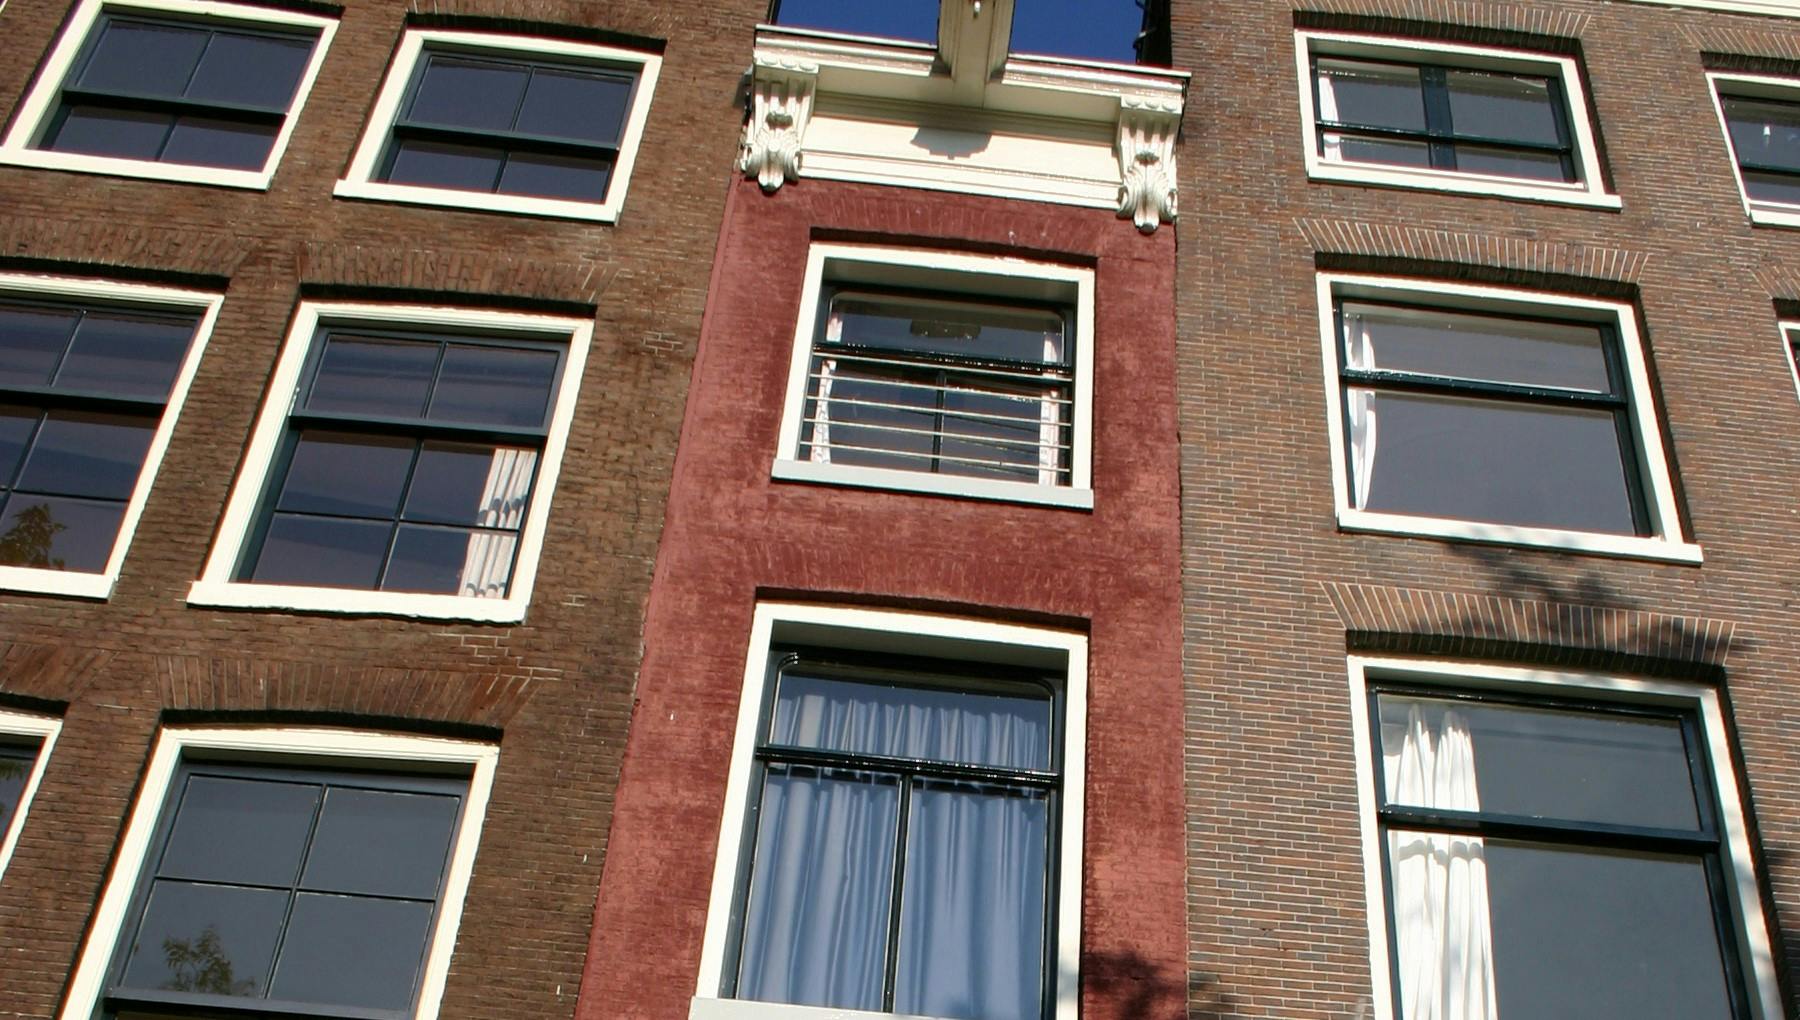 Amsterdam's narrowest house